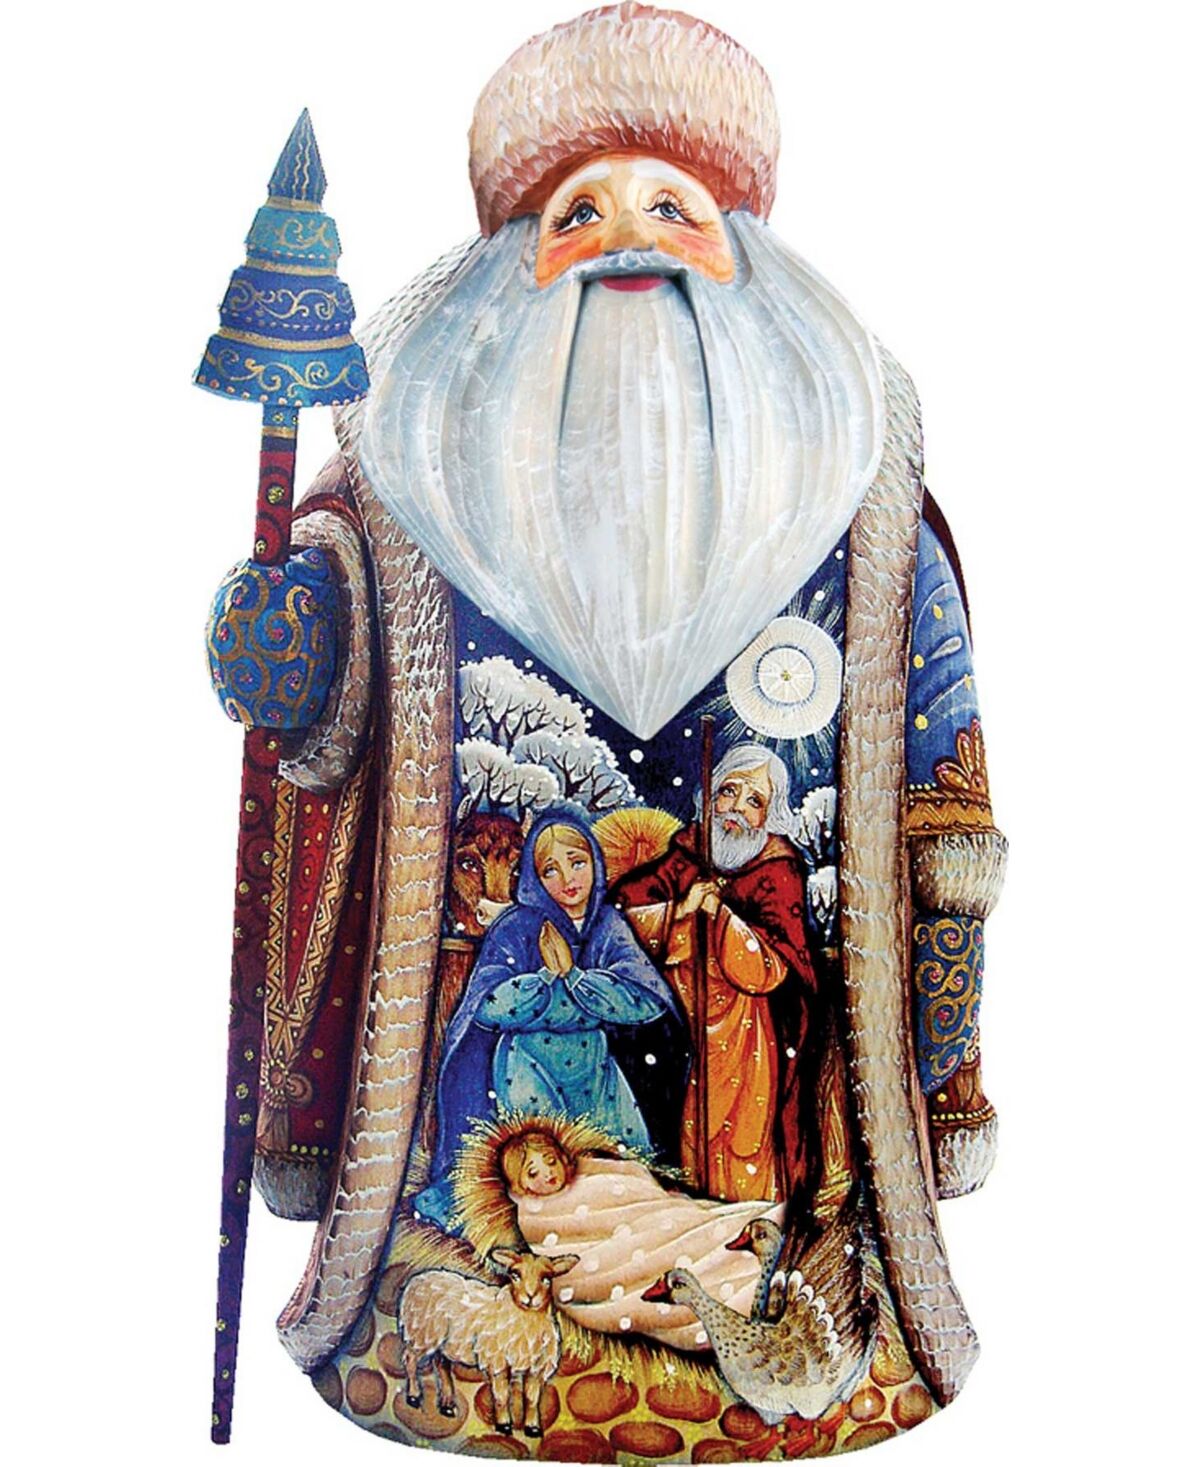 G.DeBrekht Woodcarved and Hand Painted Magic Night Father Santa Claus Figurine - Multi